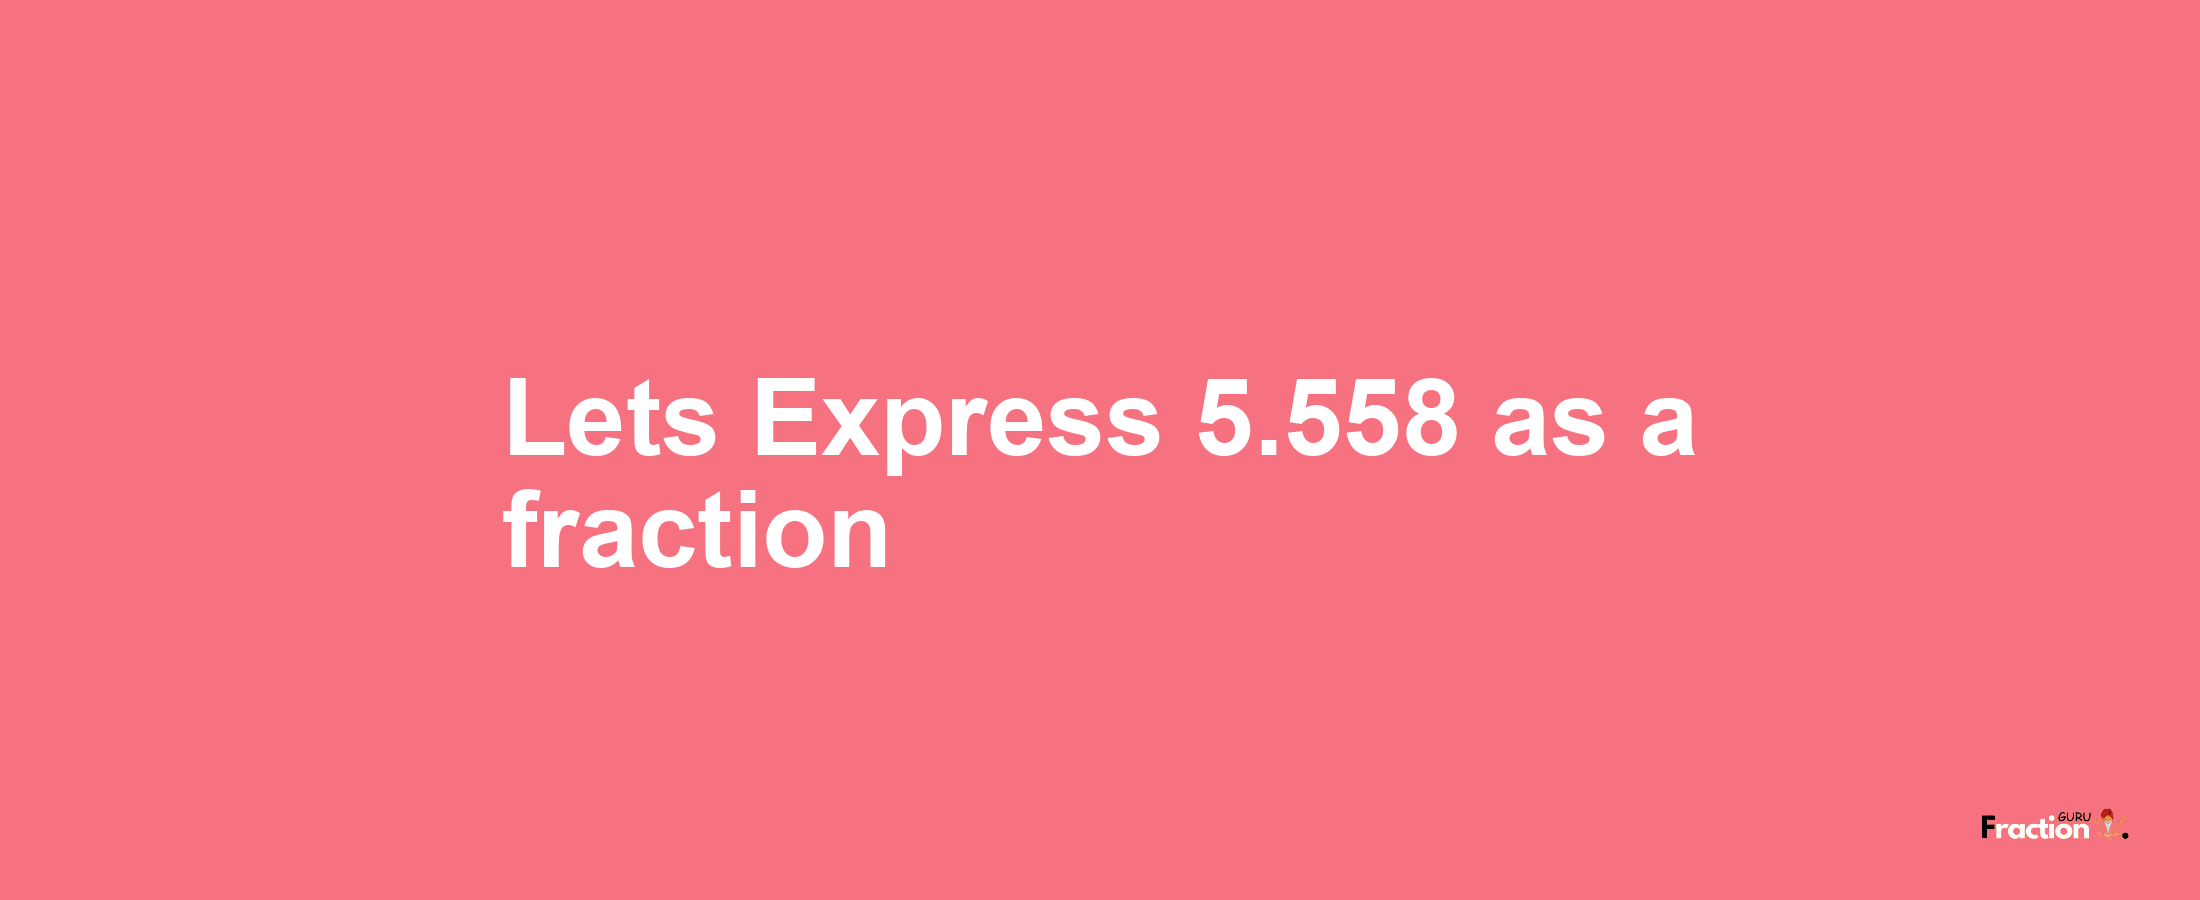 Lets Express 5.558 as afraction